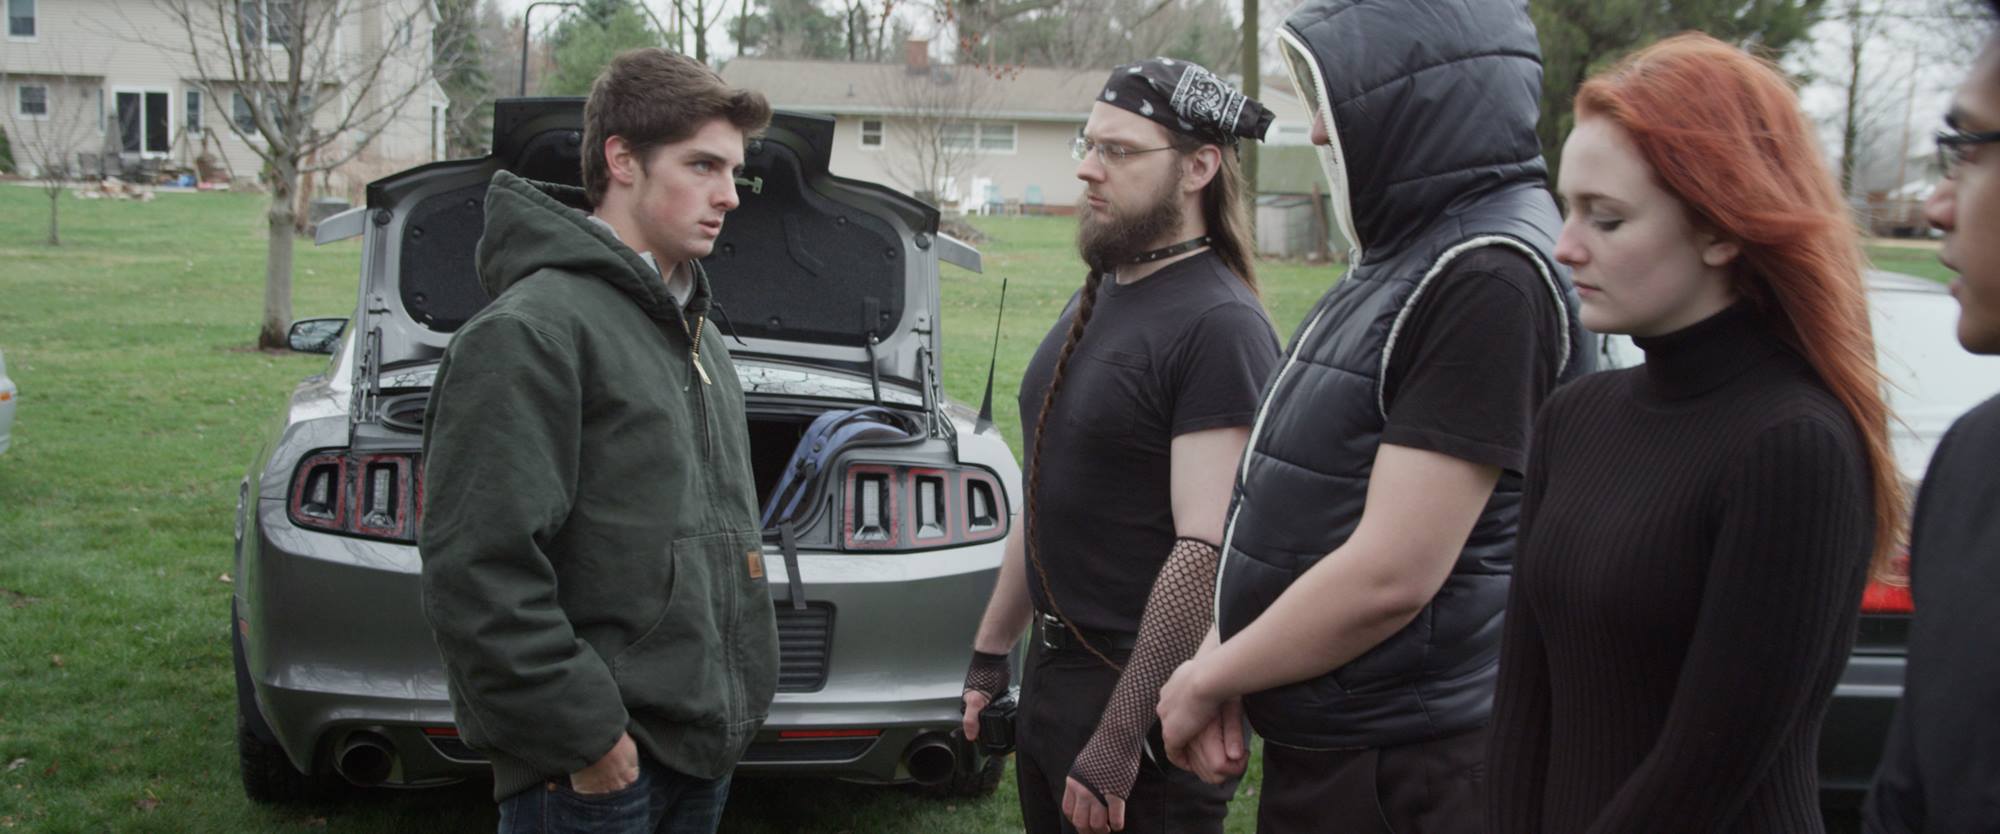 Still of Cameron McKendry, B.J. Halsall, Bill Koch, and Taylor Nelms in Young Harvest (2013) Directed by Matthew Ward